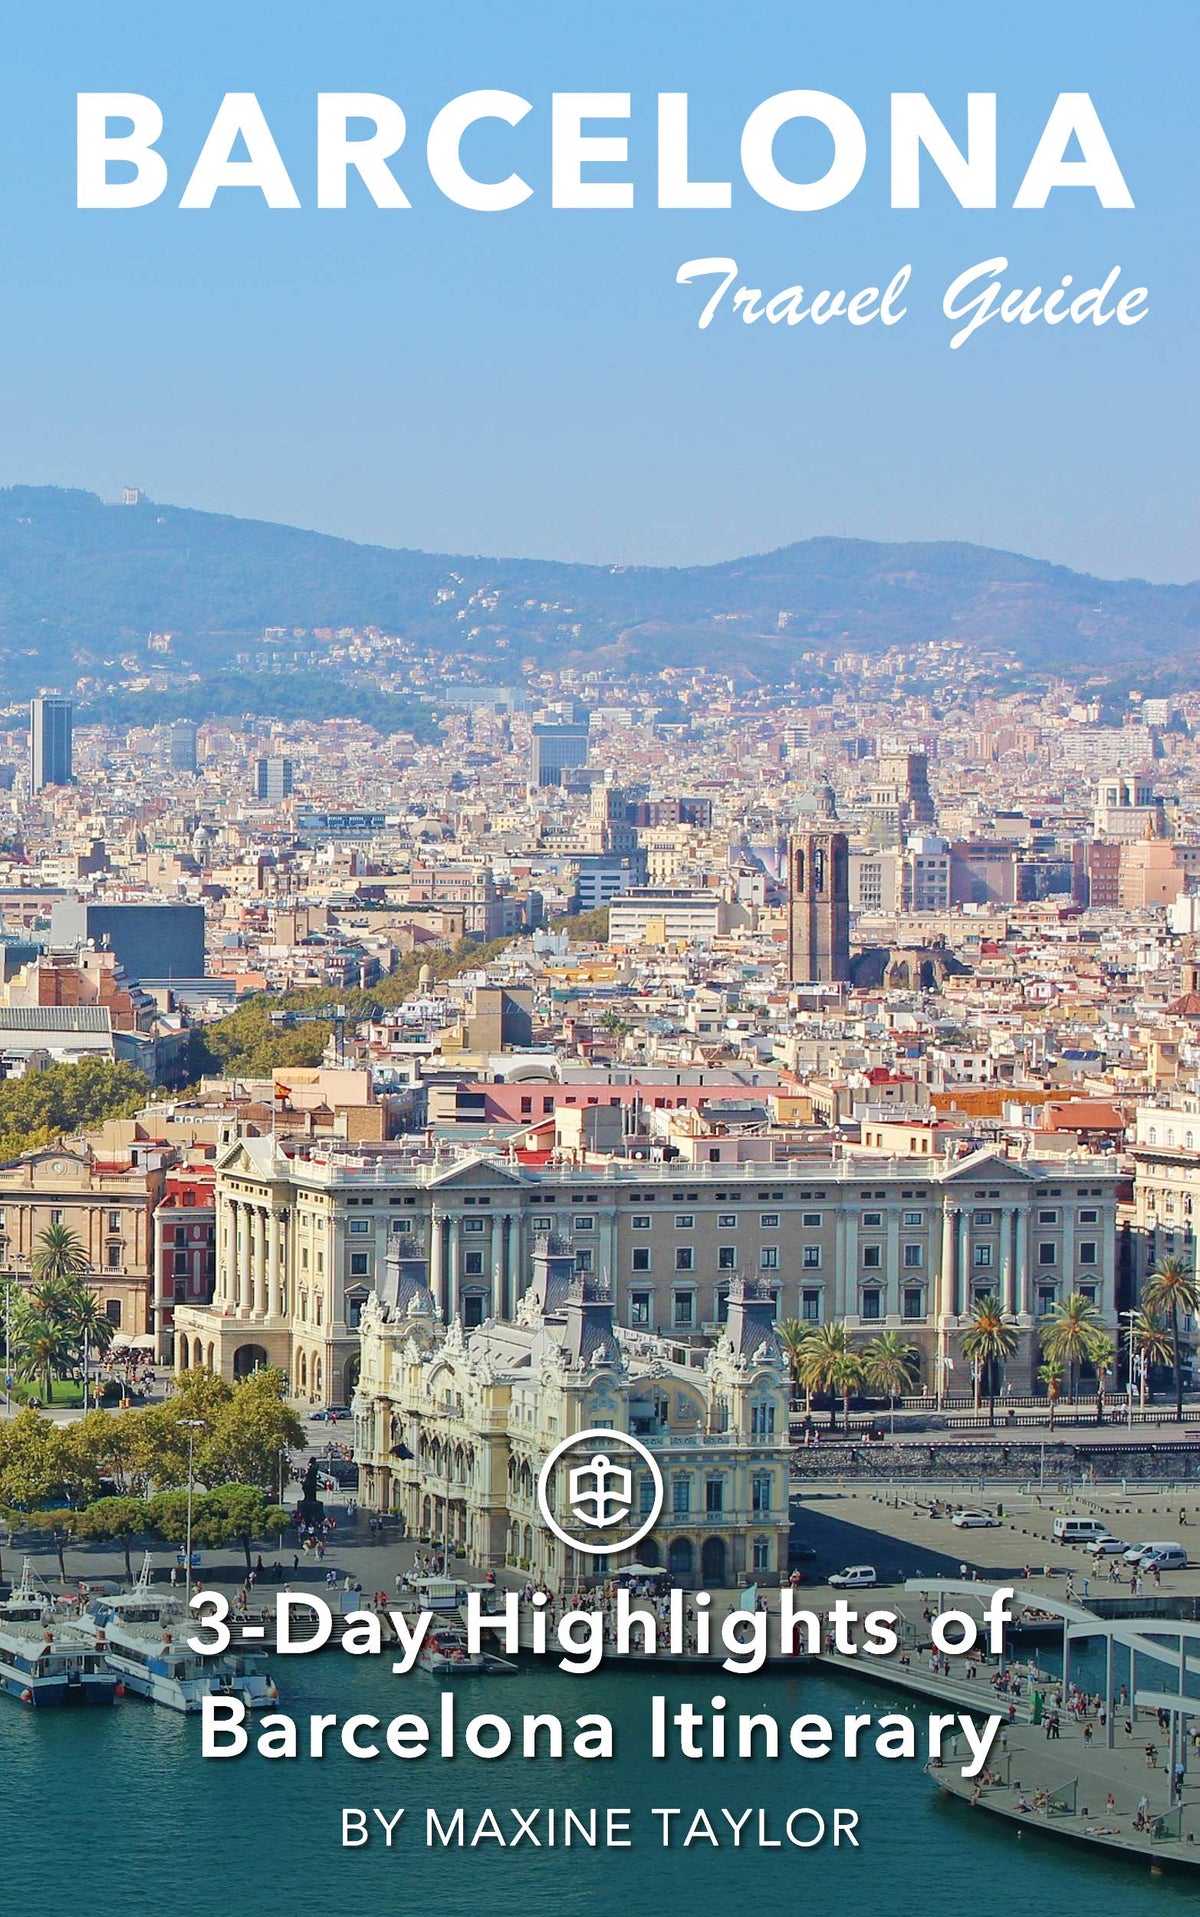 3-Day Highlights of Barcelona Itinerary